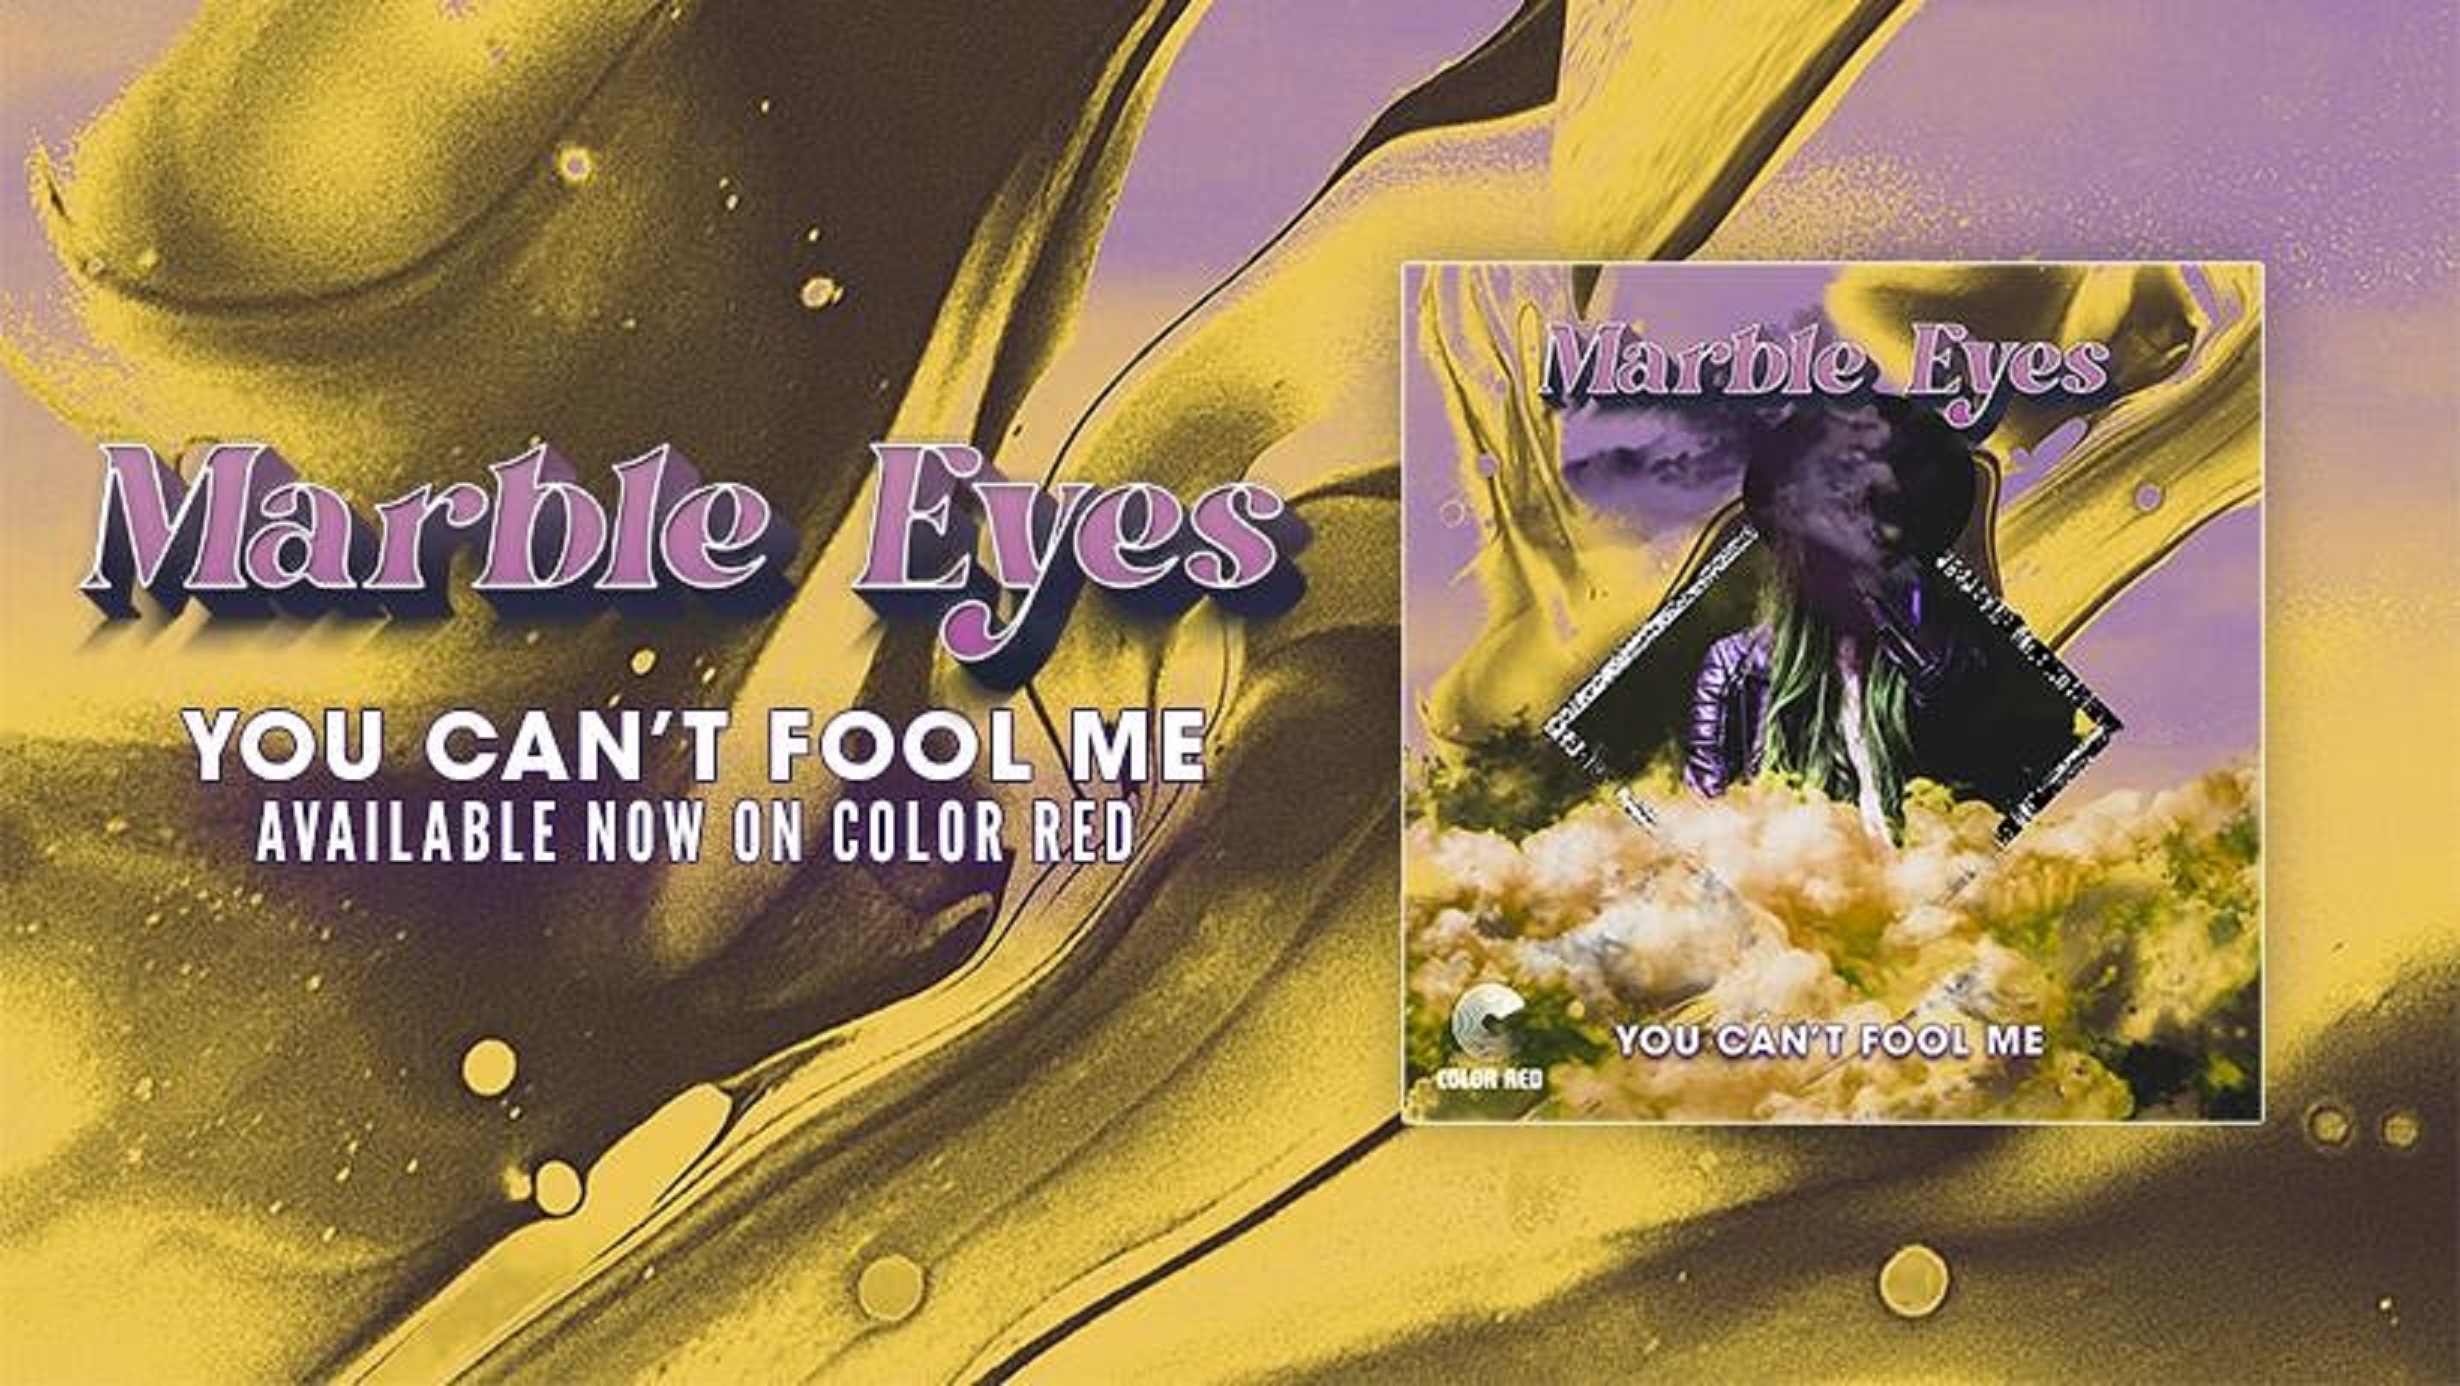 Marble Eyes Drop First Single Off Upcoming Album “Return to the Roses”